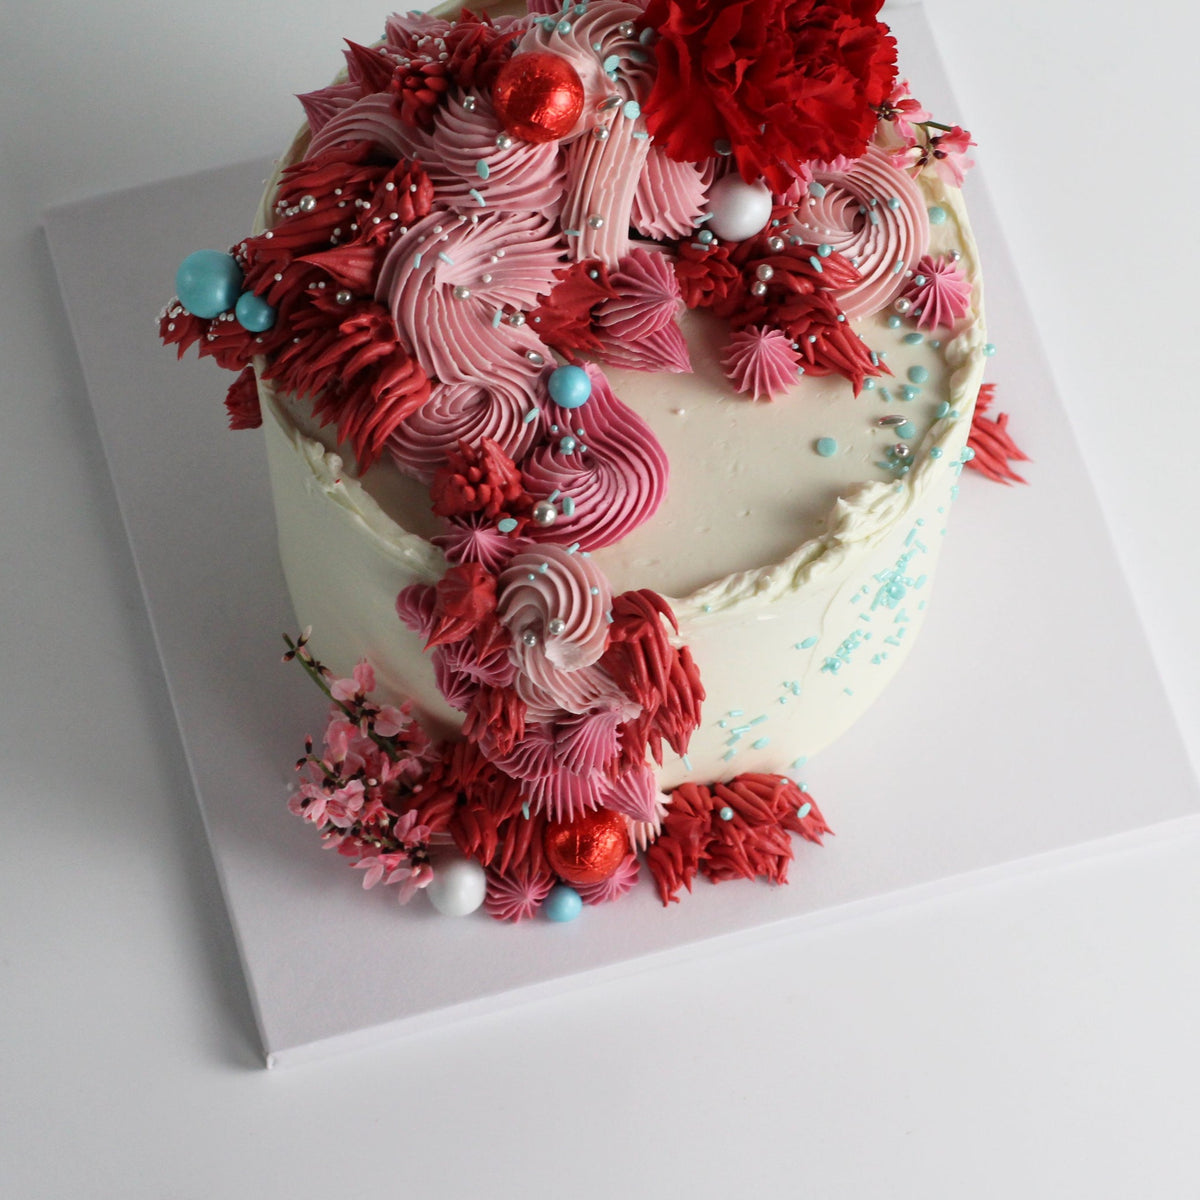 Our signature Shag Cake in red tones, covered in shaggy buttercream!